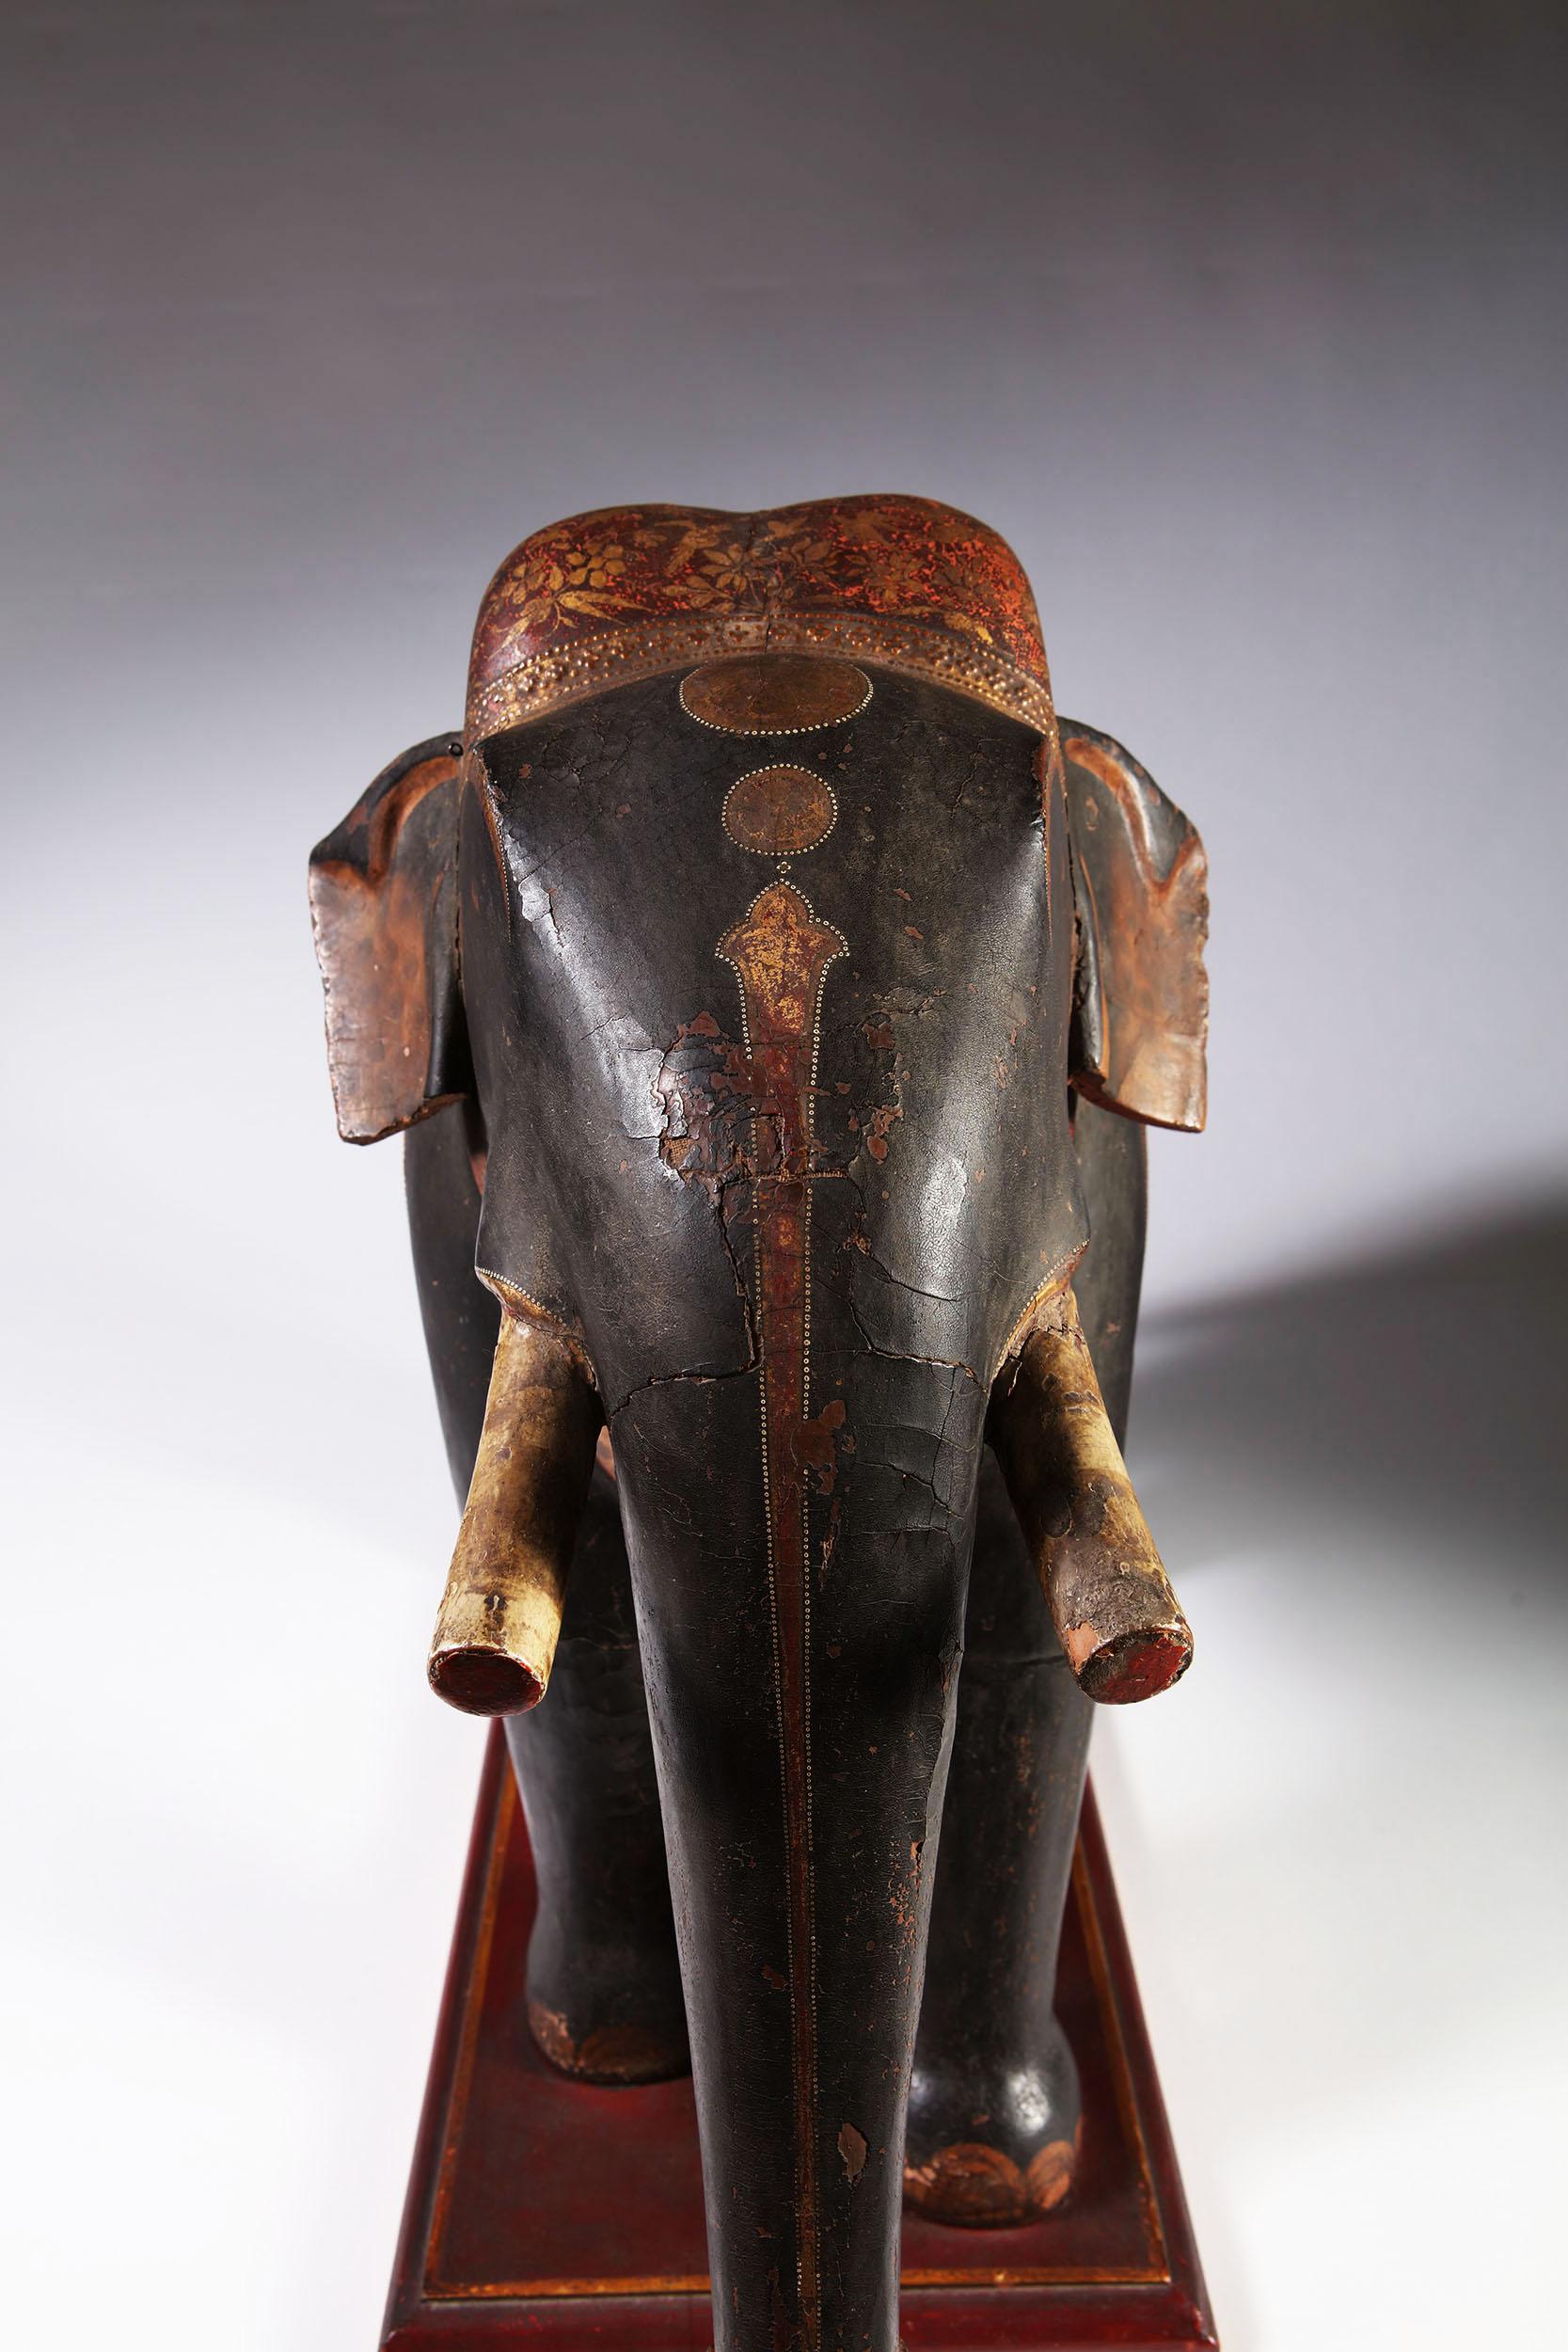 A large polychrome carved wooden processional elephant decorated with foliate head dress and foliate designs throughout, standing on a rectangular wooden plinth.